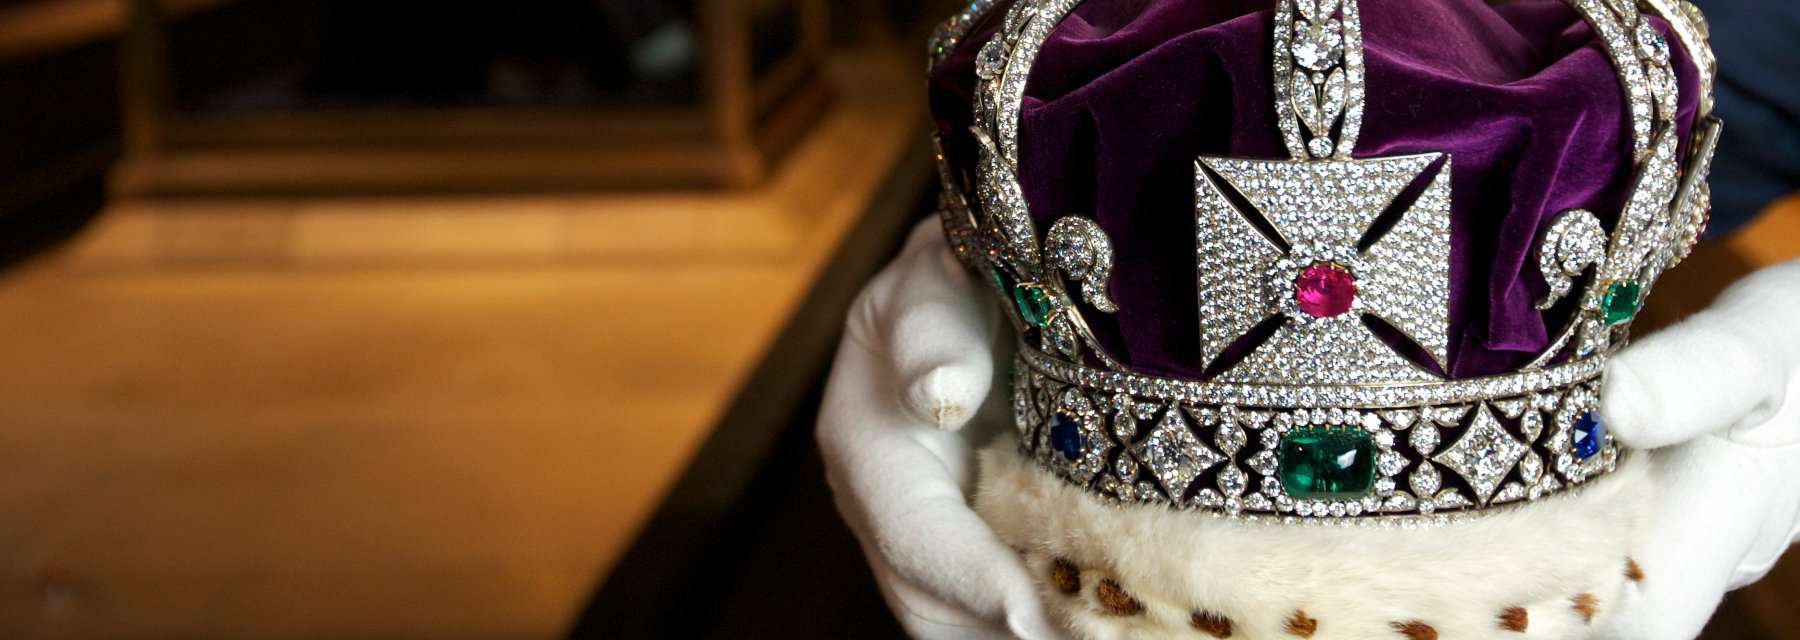 crown jewels at the tower of london